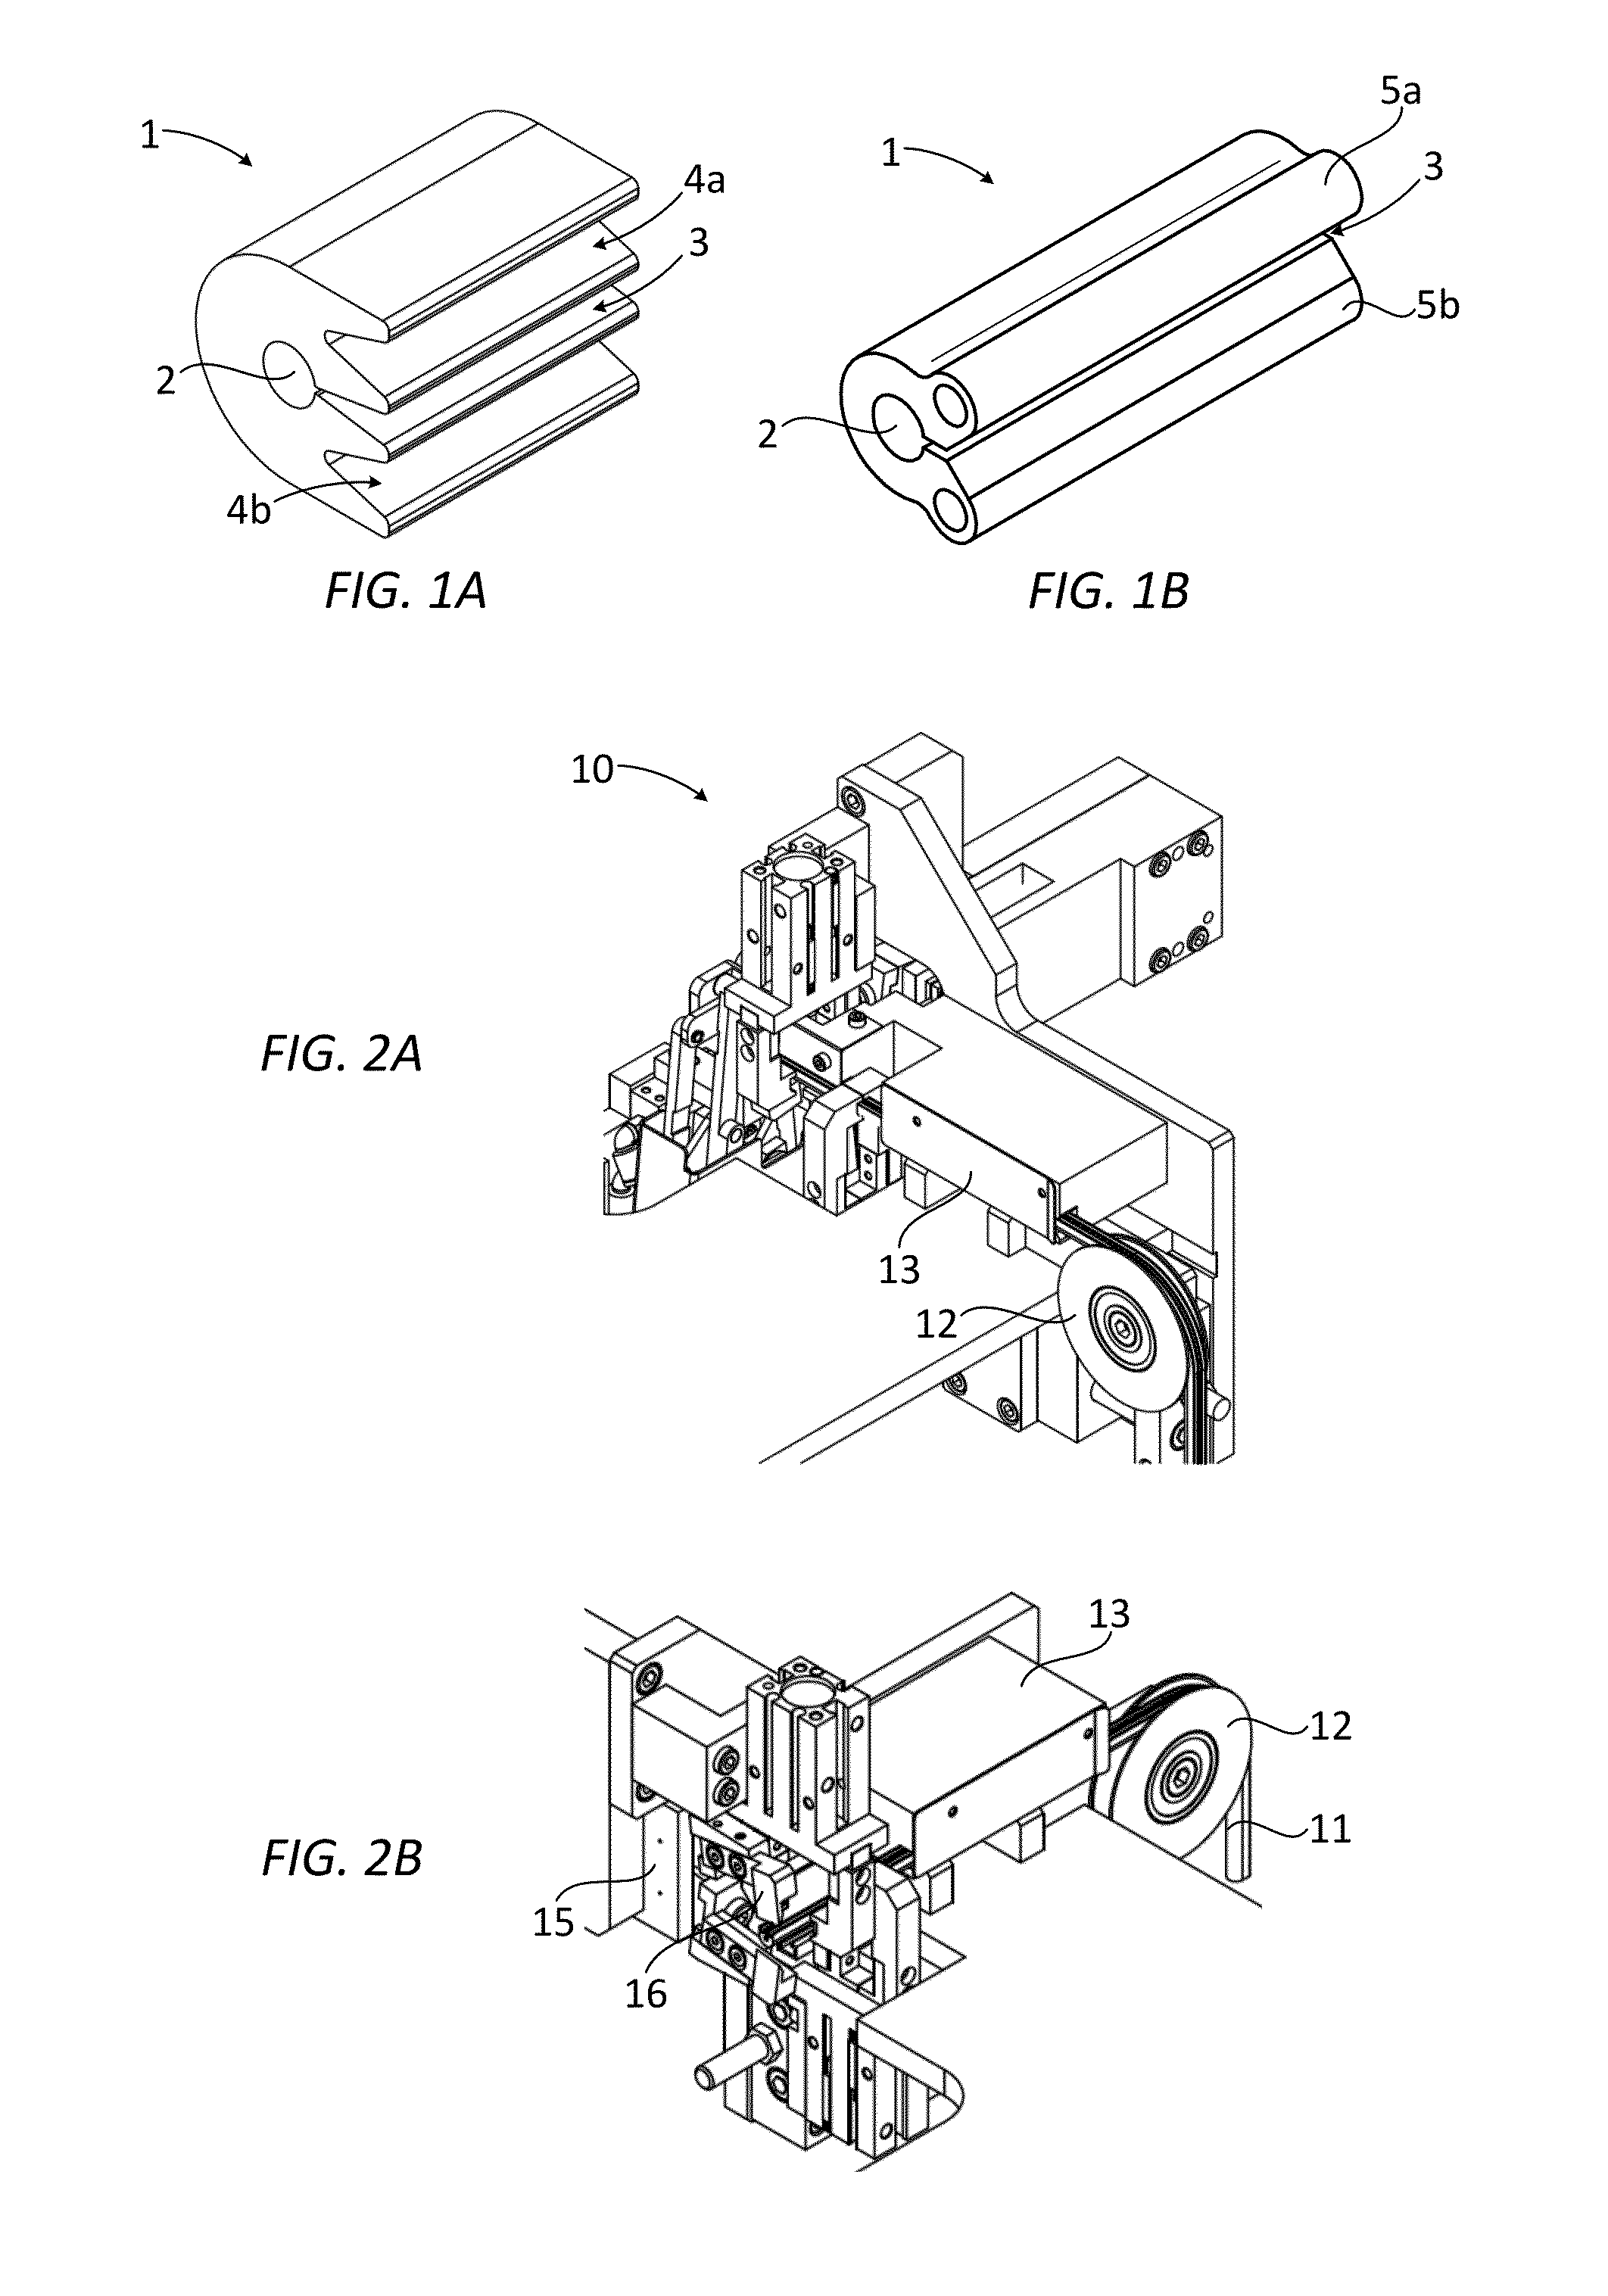 Graft element, system and method for joining plant stem sections using such graft element, and system and method for preparing such graft element